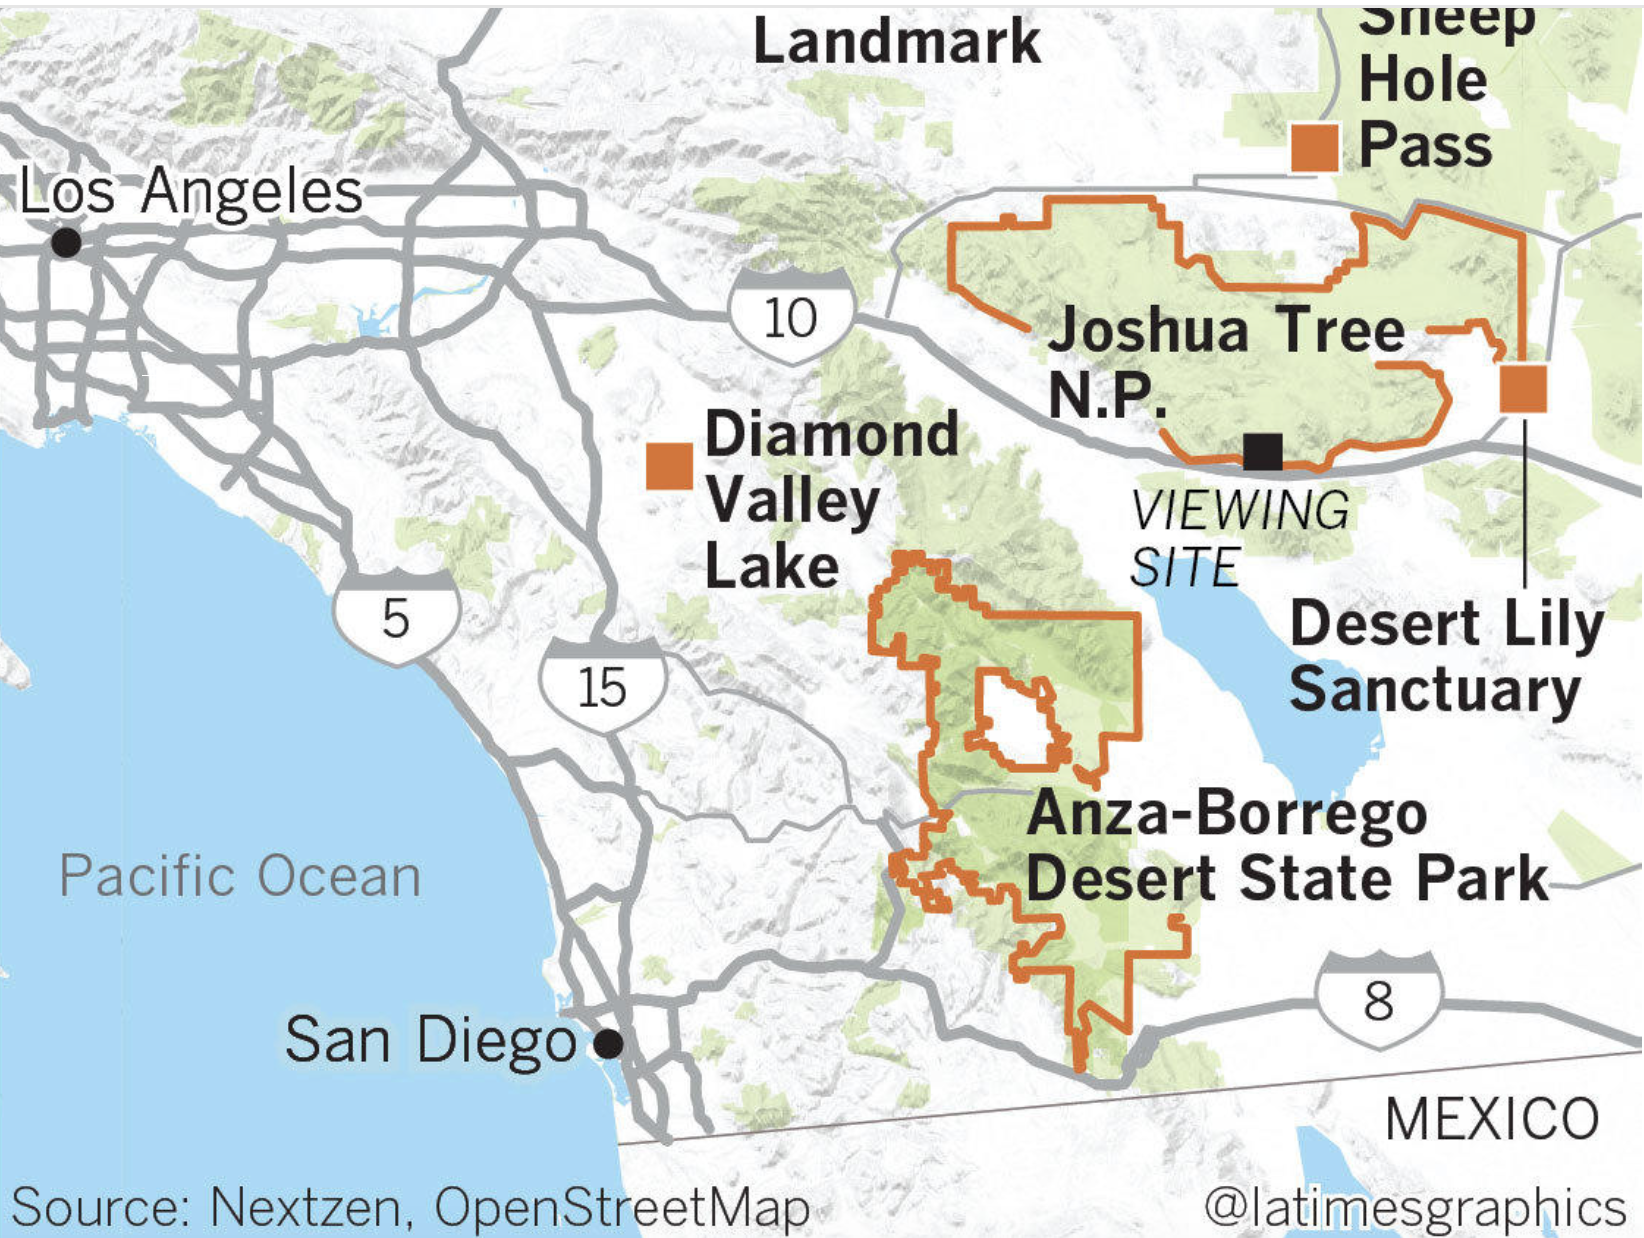 An Anza-Borrego map shows the park is well off the beaten path in Southern California.